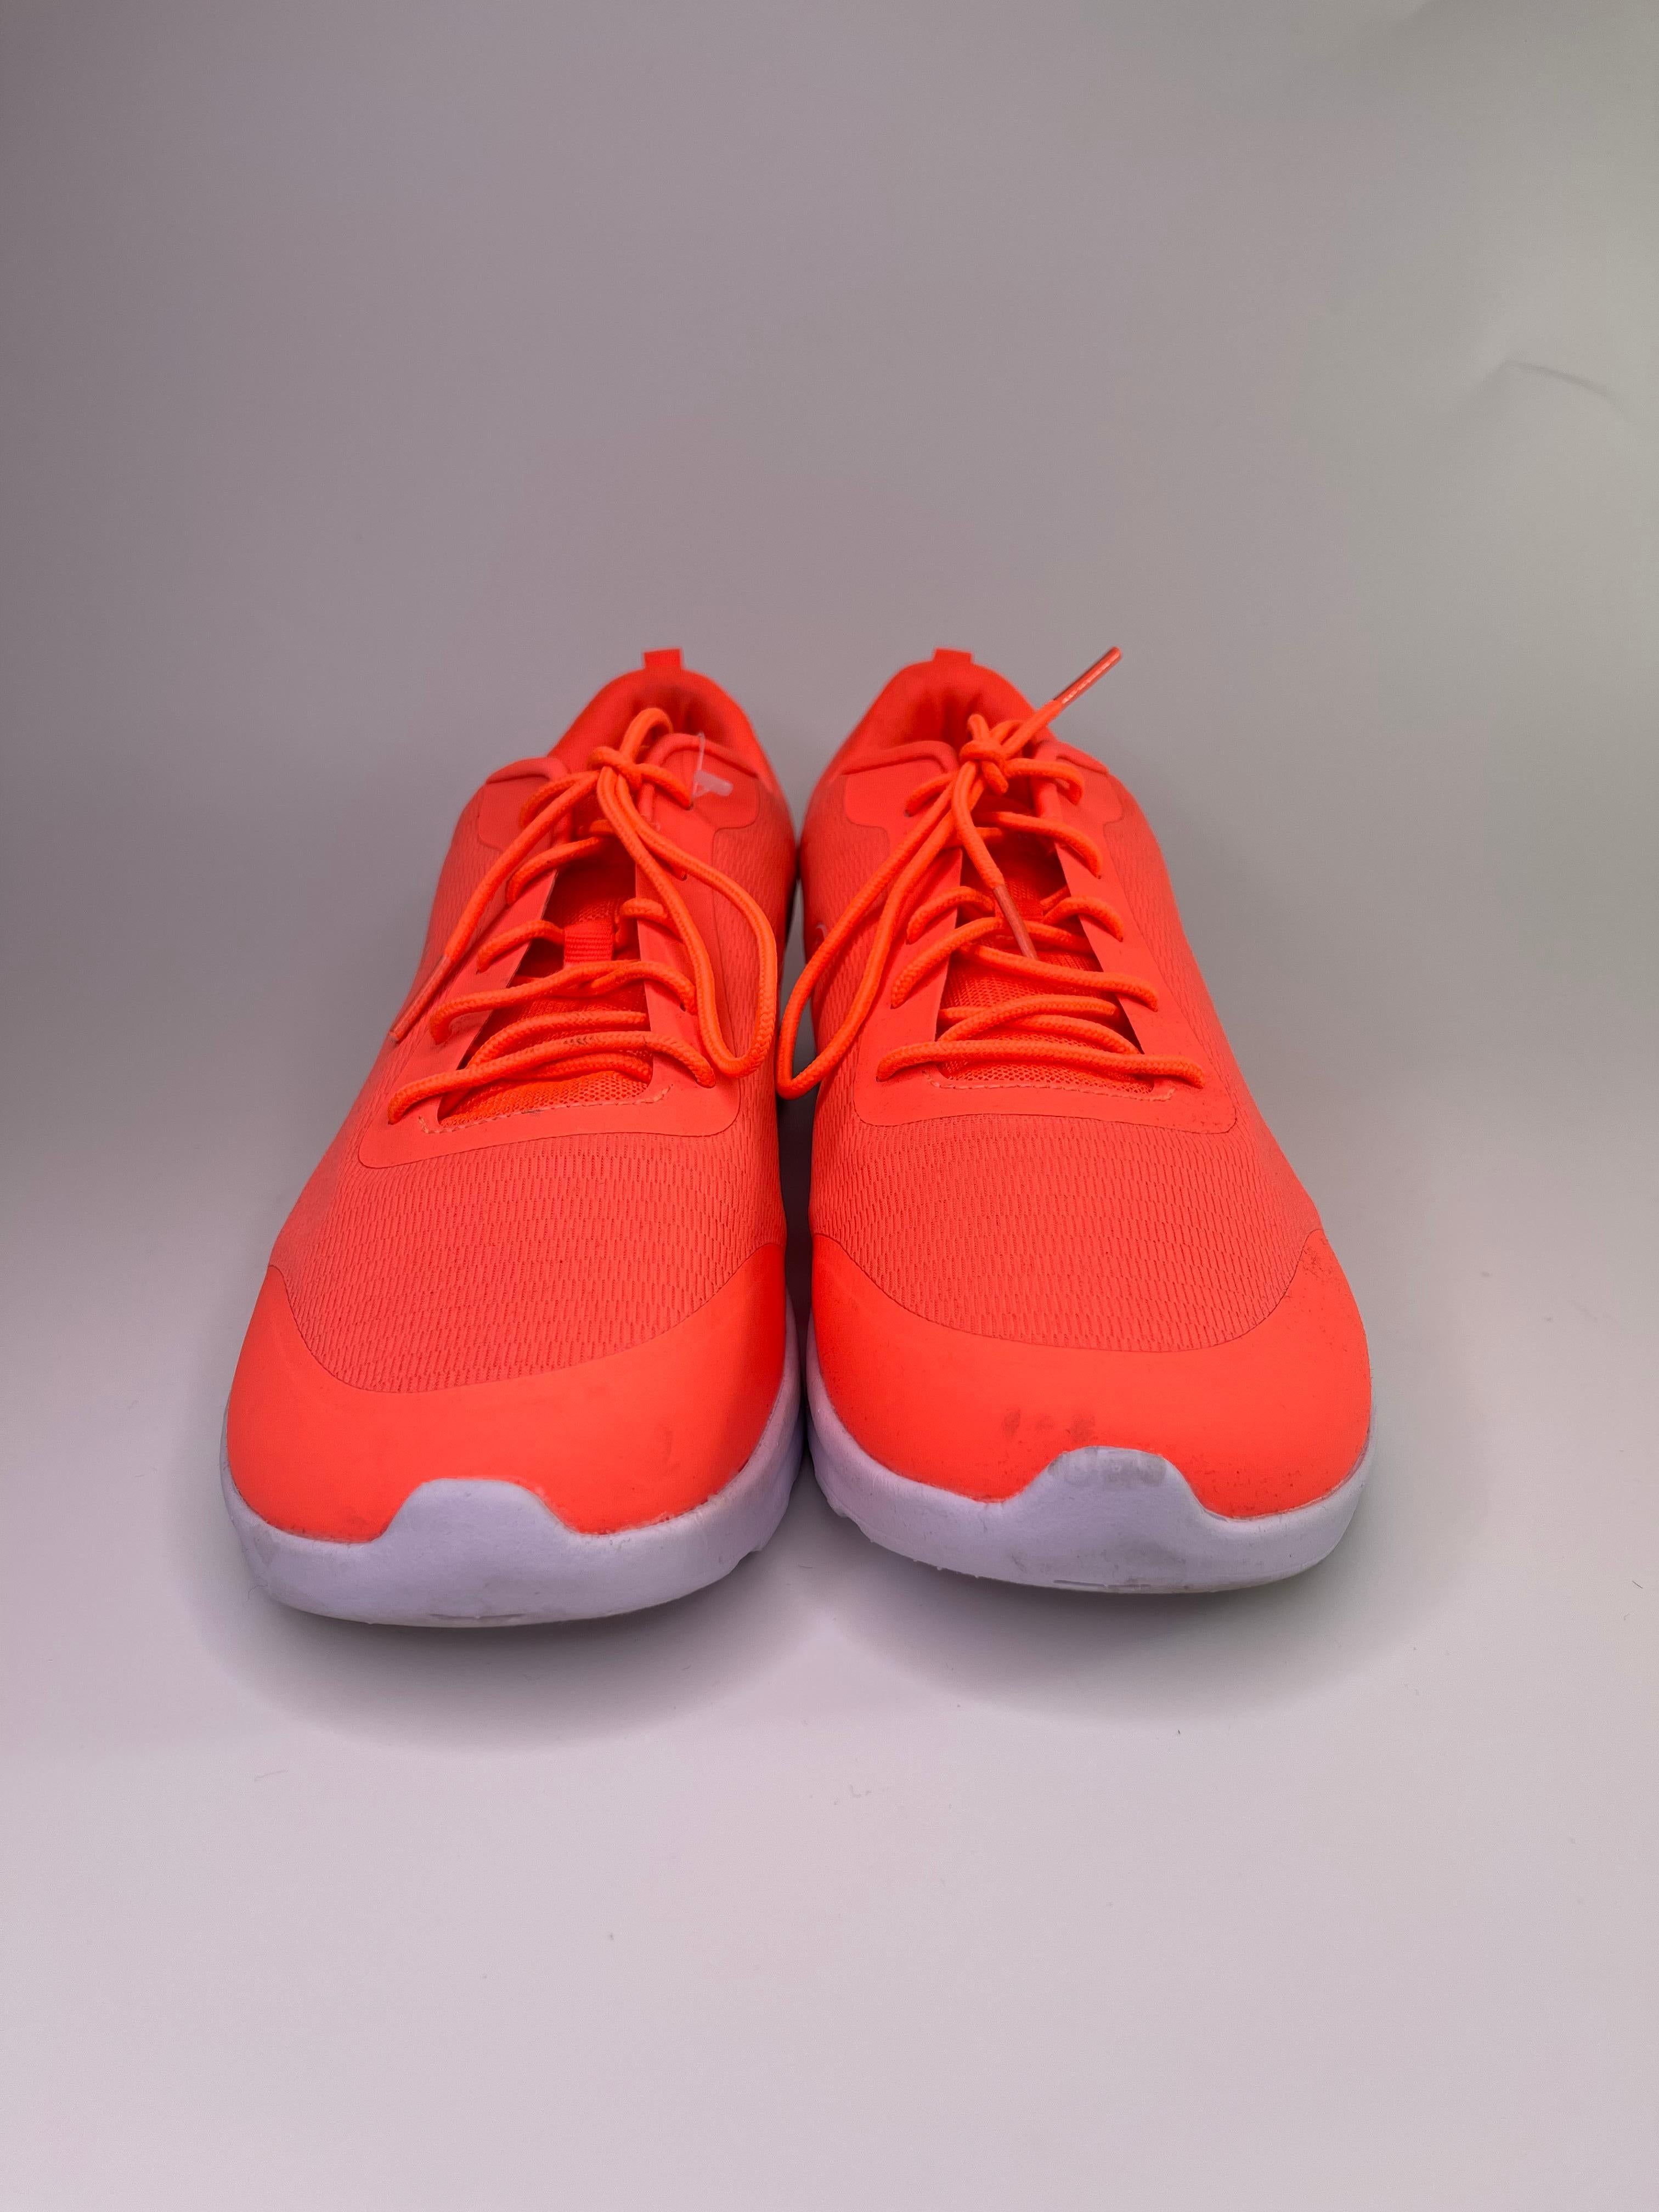 COLOR: Neon Orange
MATERIAL: Synthetic
ITEM CODE: 167602
SIZE: 12 US
COMES WITH: Shoe box
CONDITION: Used once. Under-soles are dirty, but can be cleaned to look new. 

Made in China